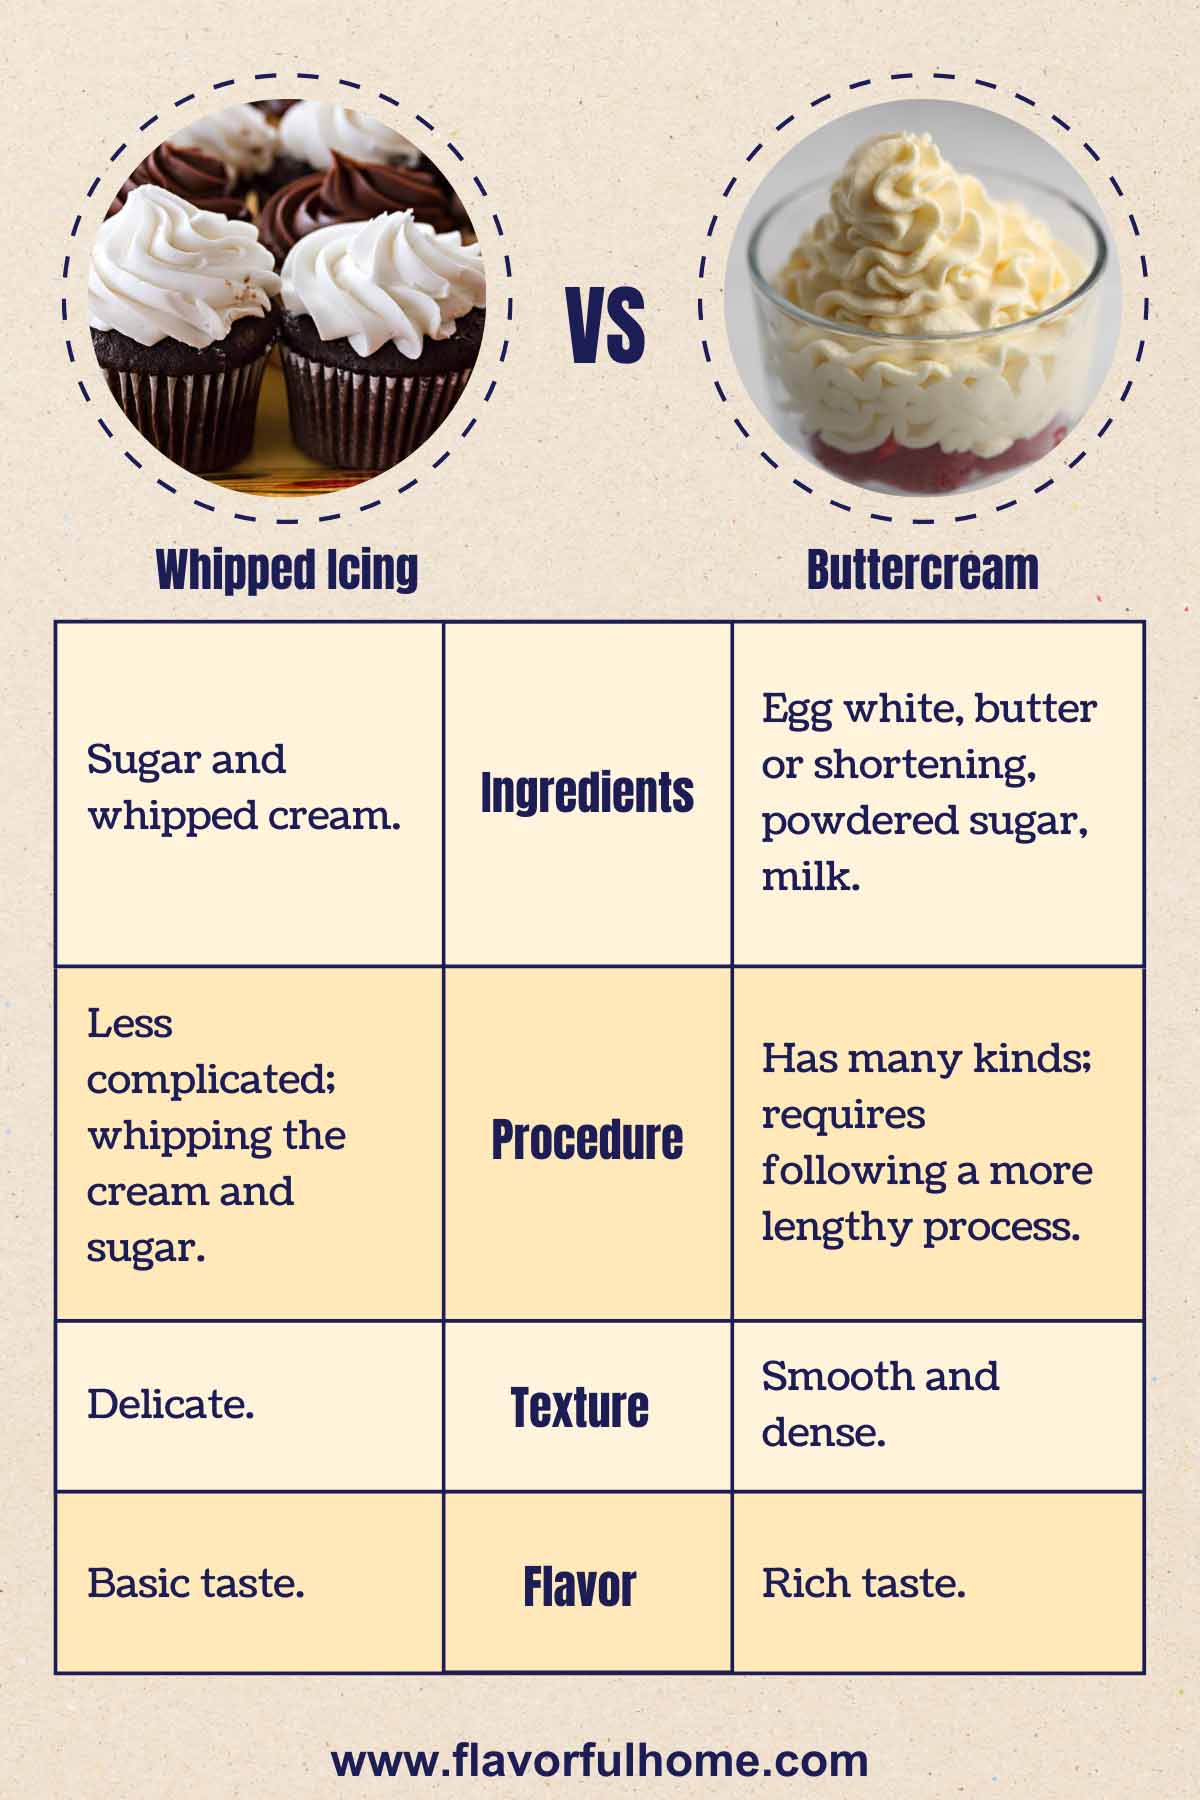 Infographic with table comparing facts about whipped Icing vs. Buttercream Frosting.